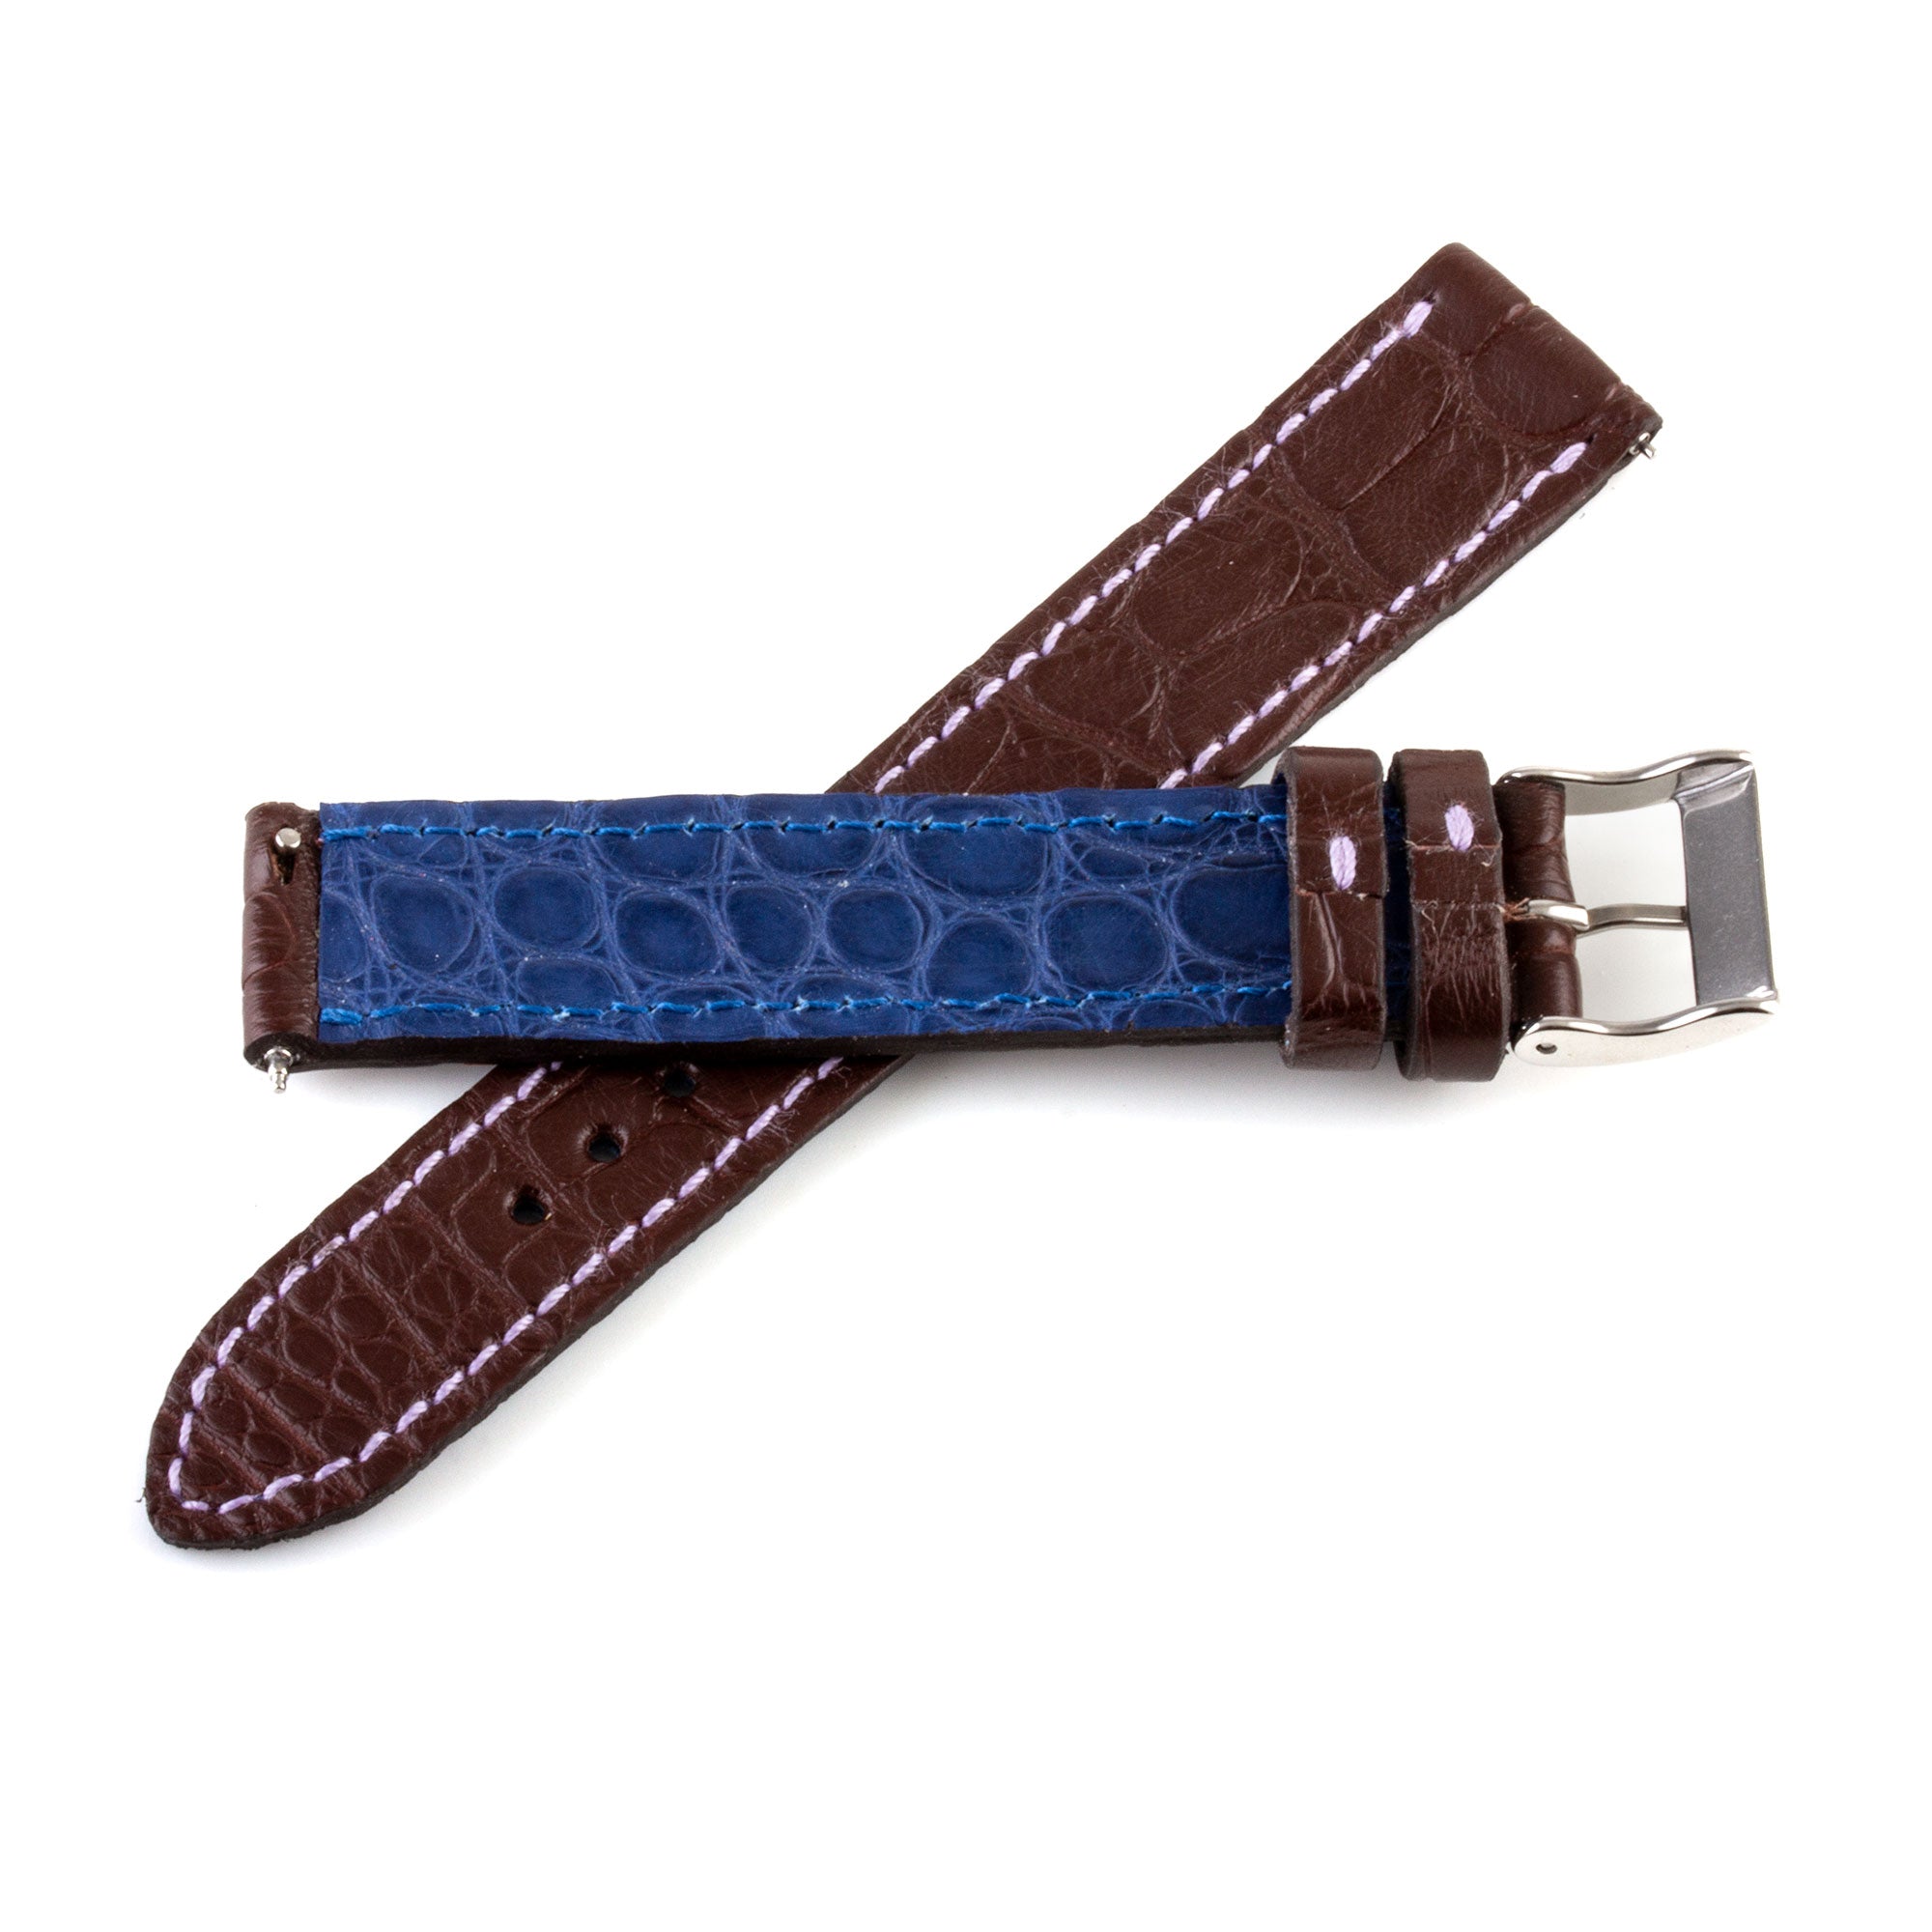 Alligator "Solo" leather watch band - 17mm width (0.67 inches) / Size M (n° 6)